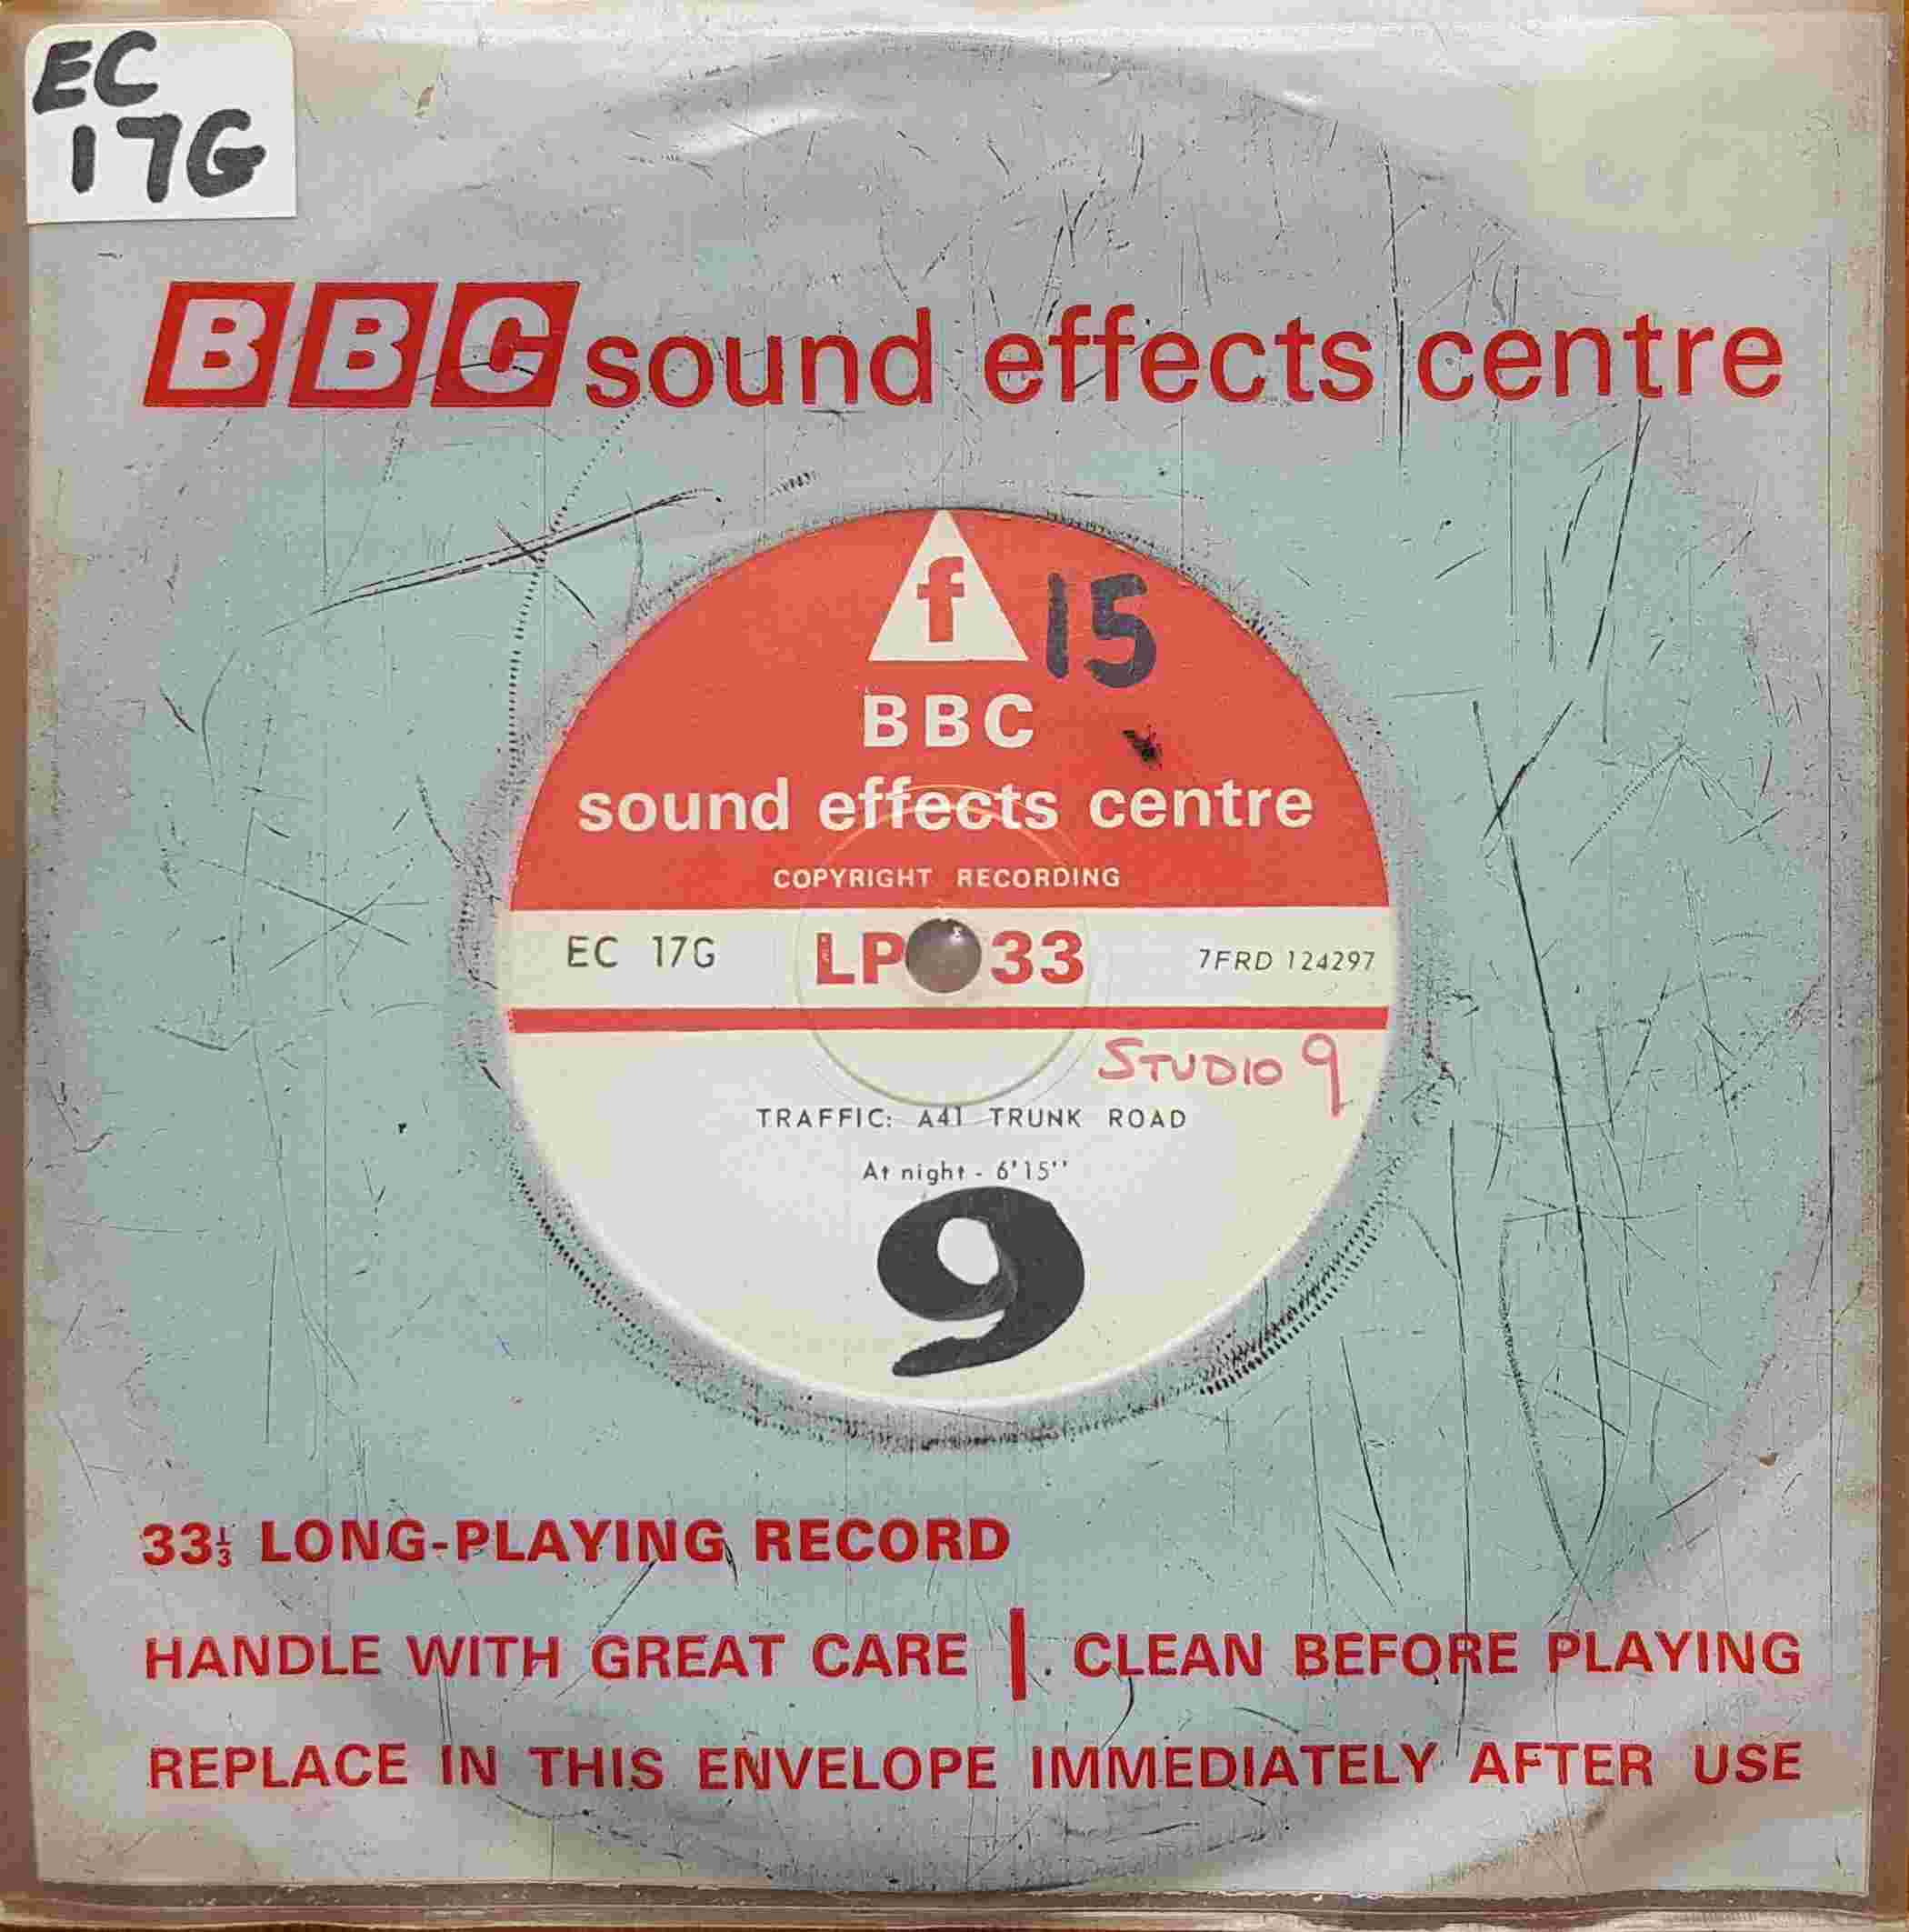 Picture of EC 17G Traffic: A41 trunk road by artist Not registered from the BBC singles - Records and Tapes library